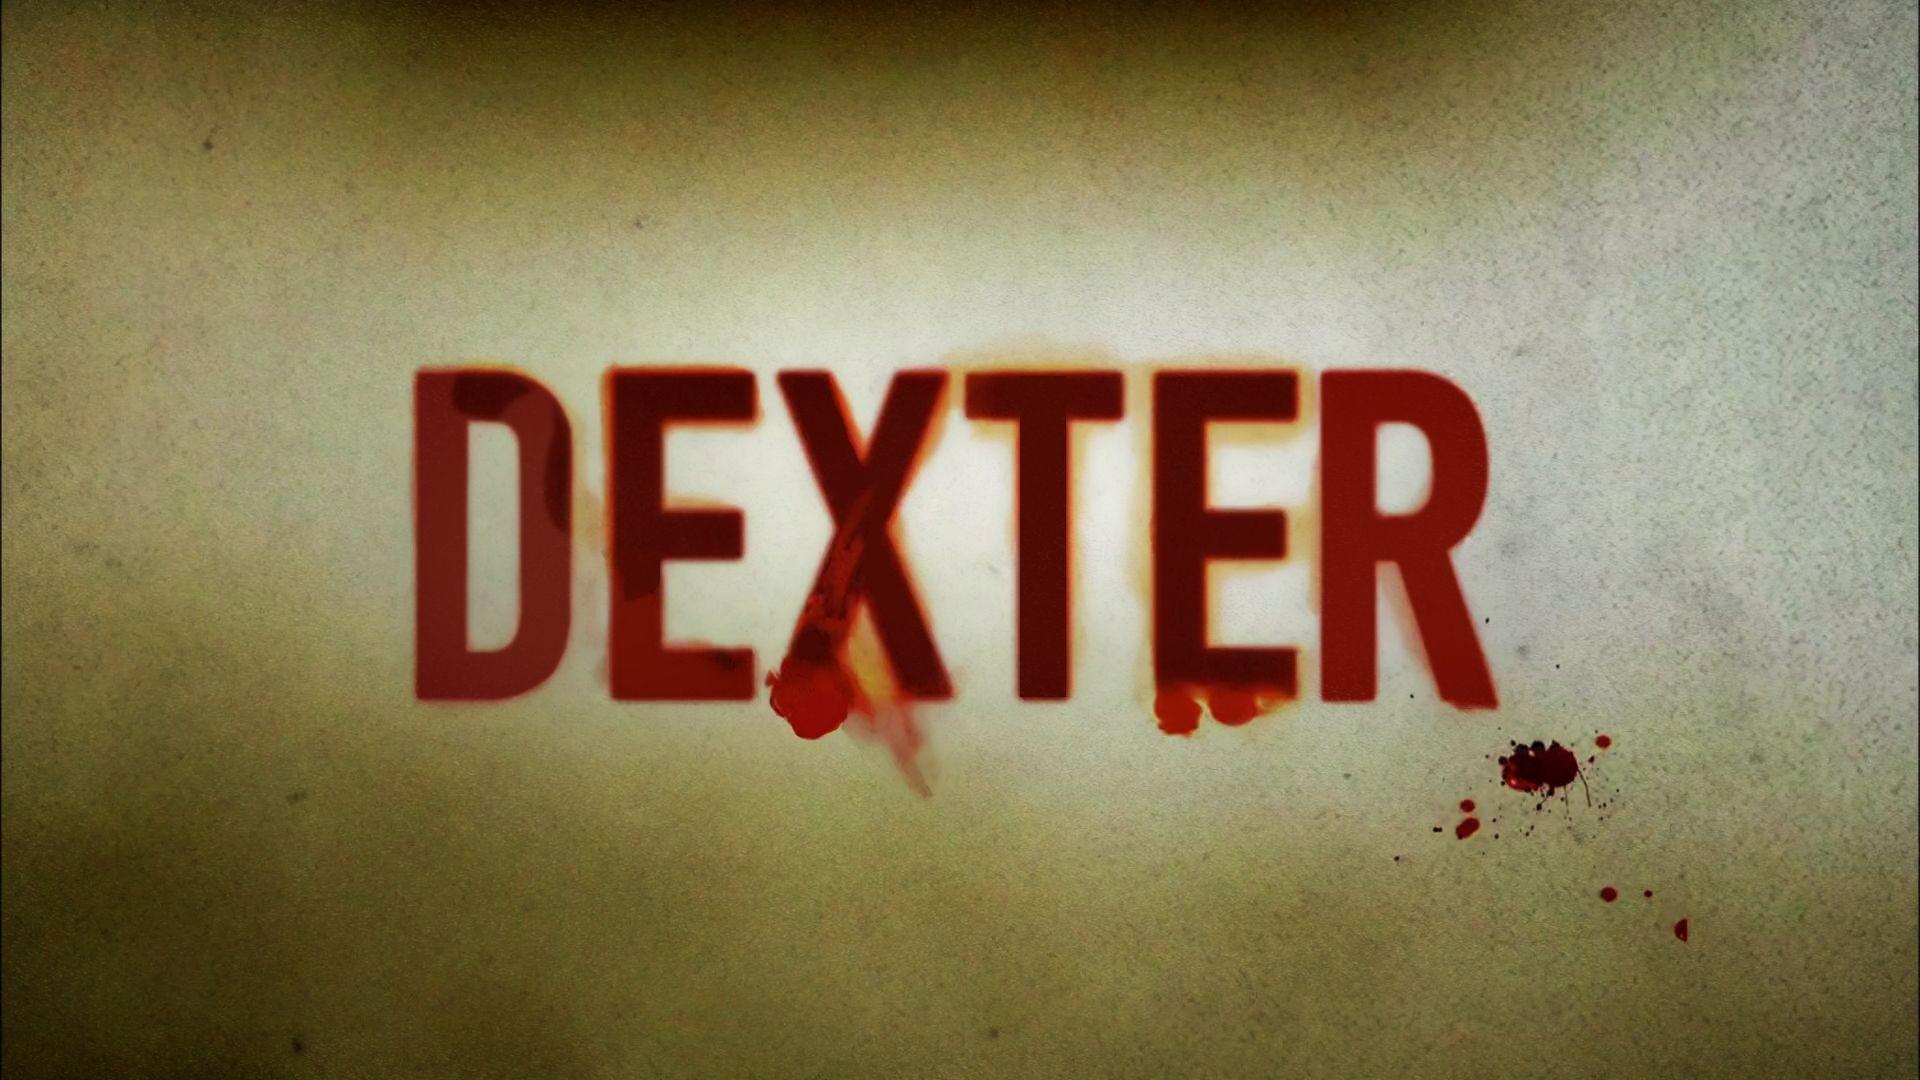 HD Wallpaper Of Dexter, The Forensic Geek. I Have A PC